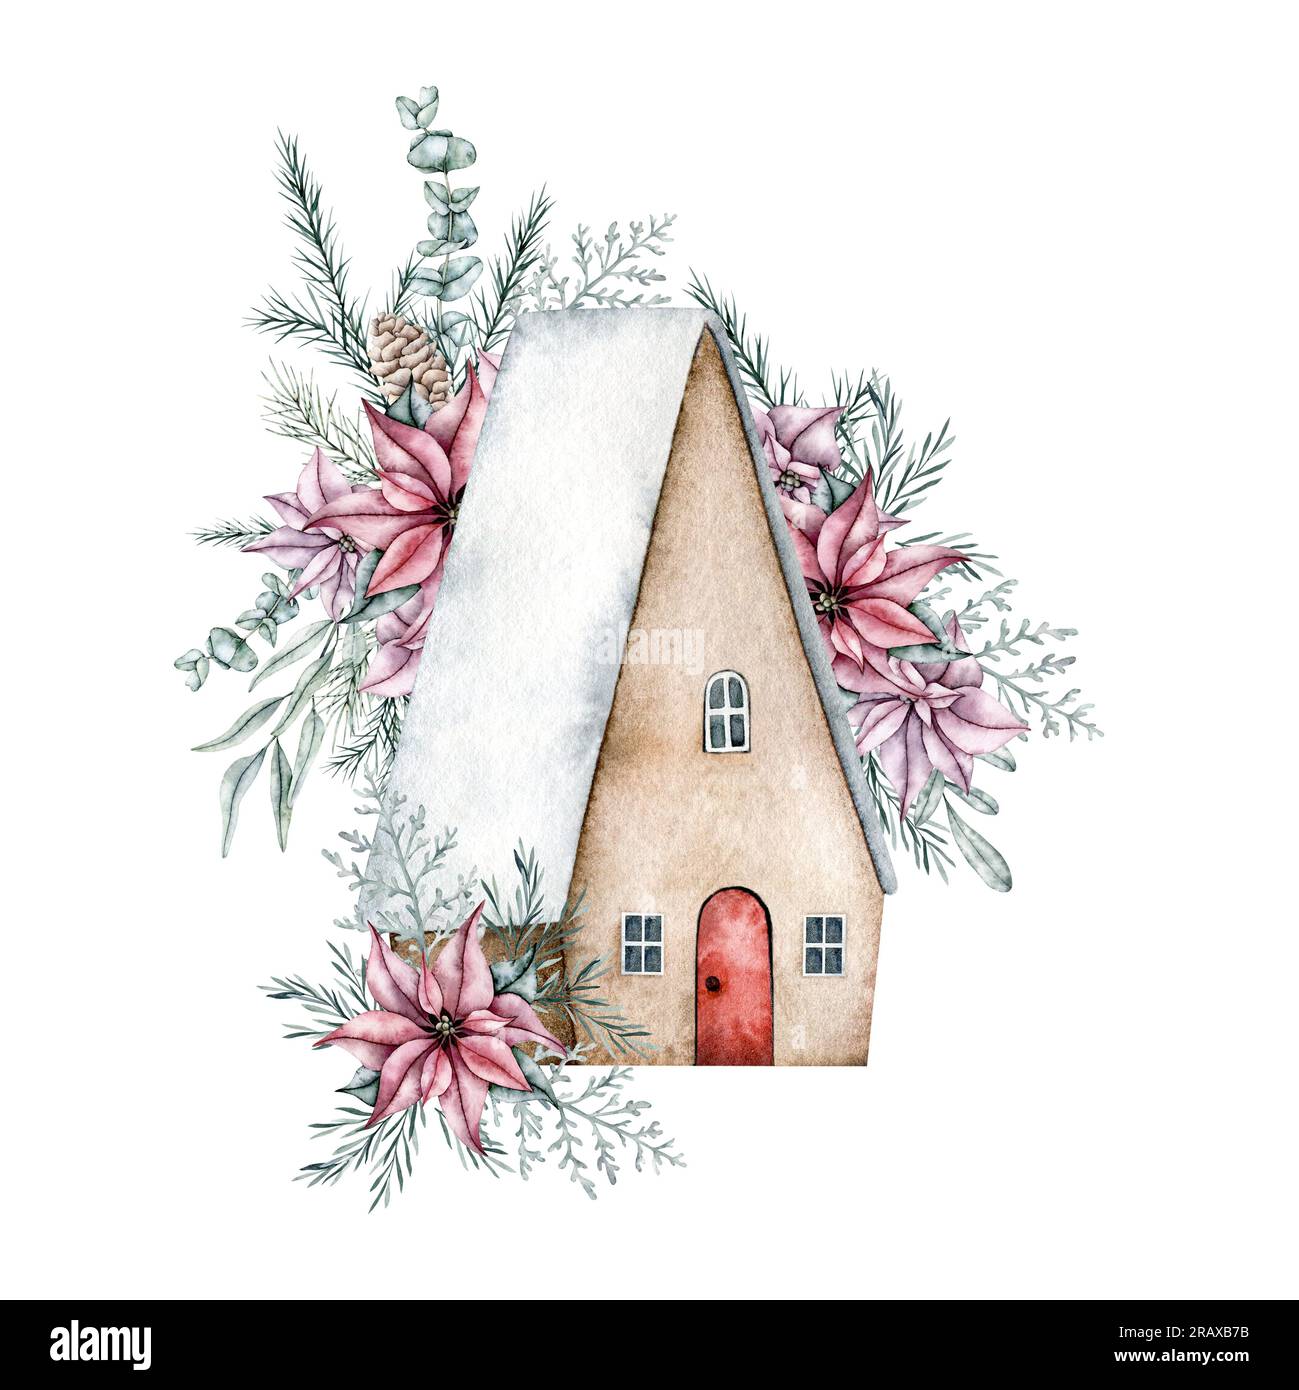 Winter cute house with doors, windows, snow on the roof in flowers of red poinsettia, pine cone, emerald spruce branch, eucalyptus. Hand painted Stock Photo